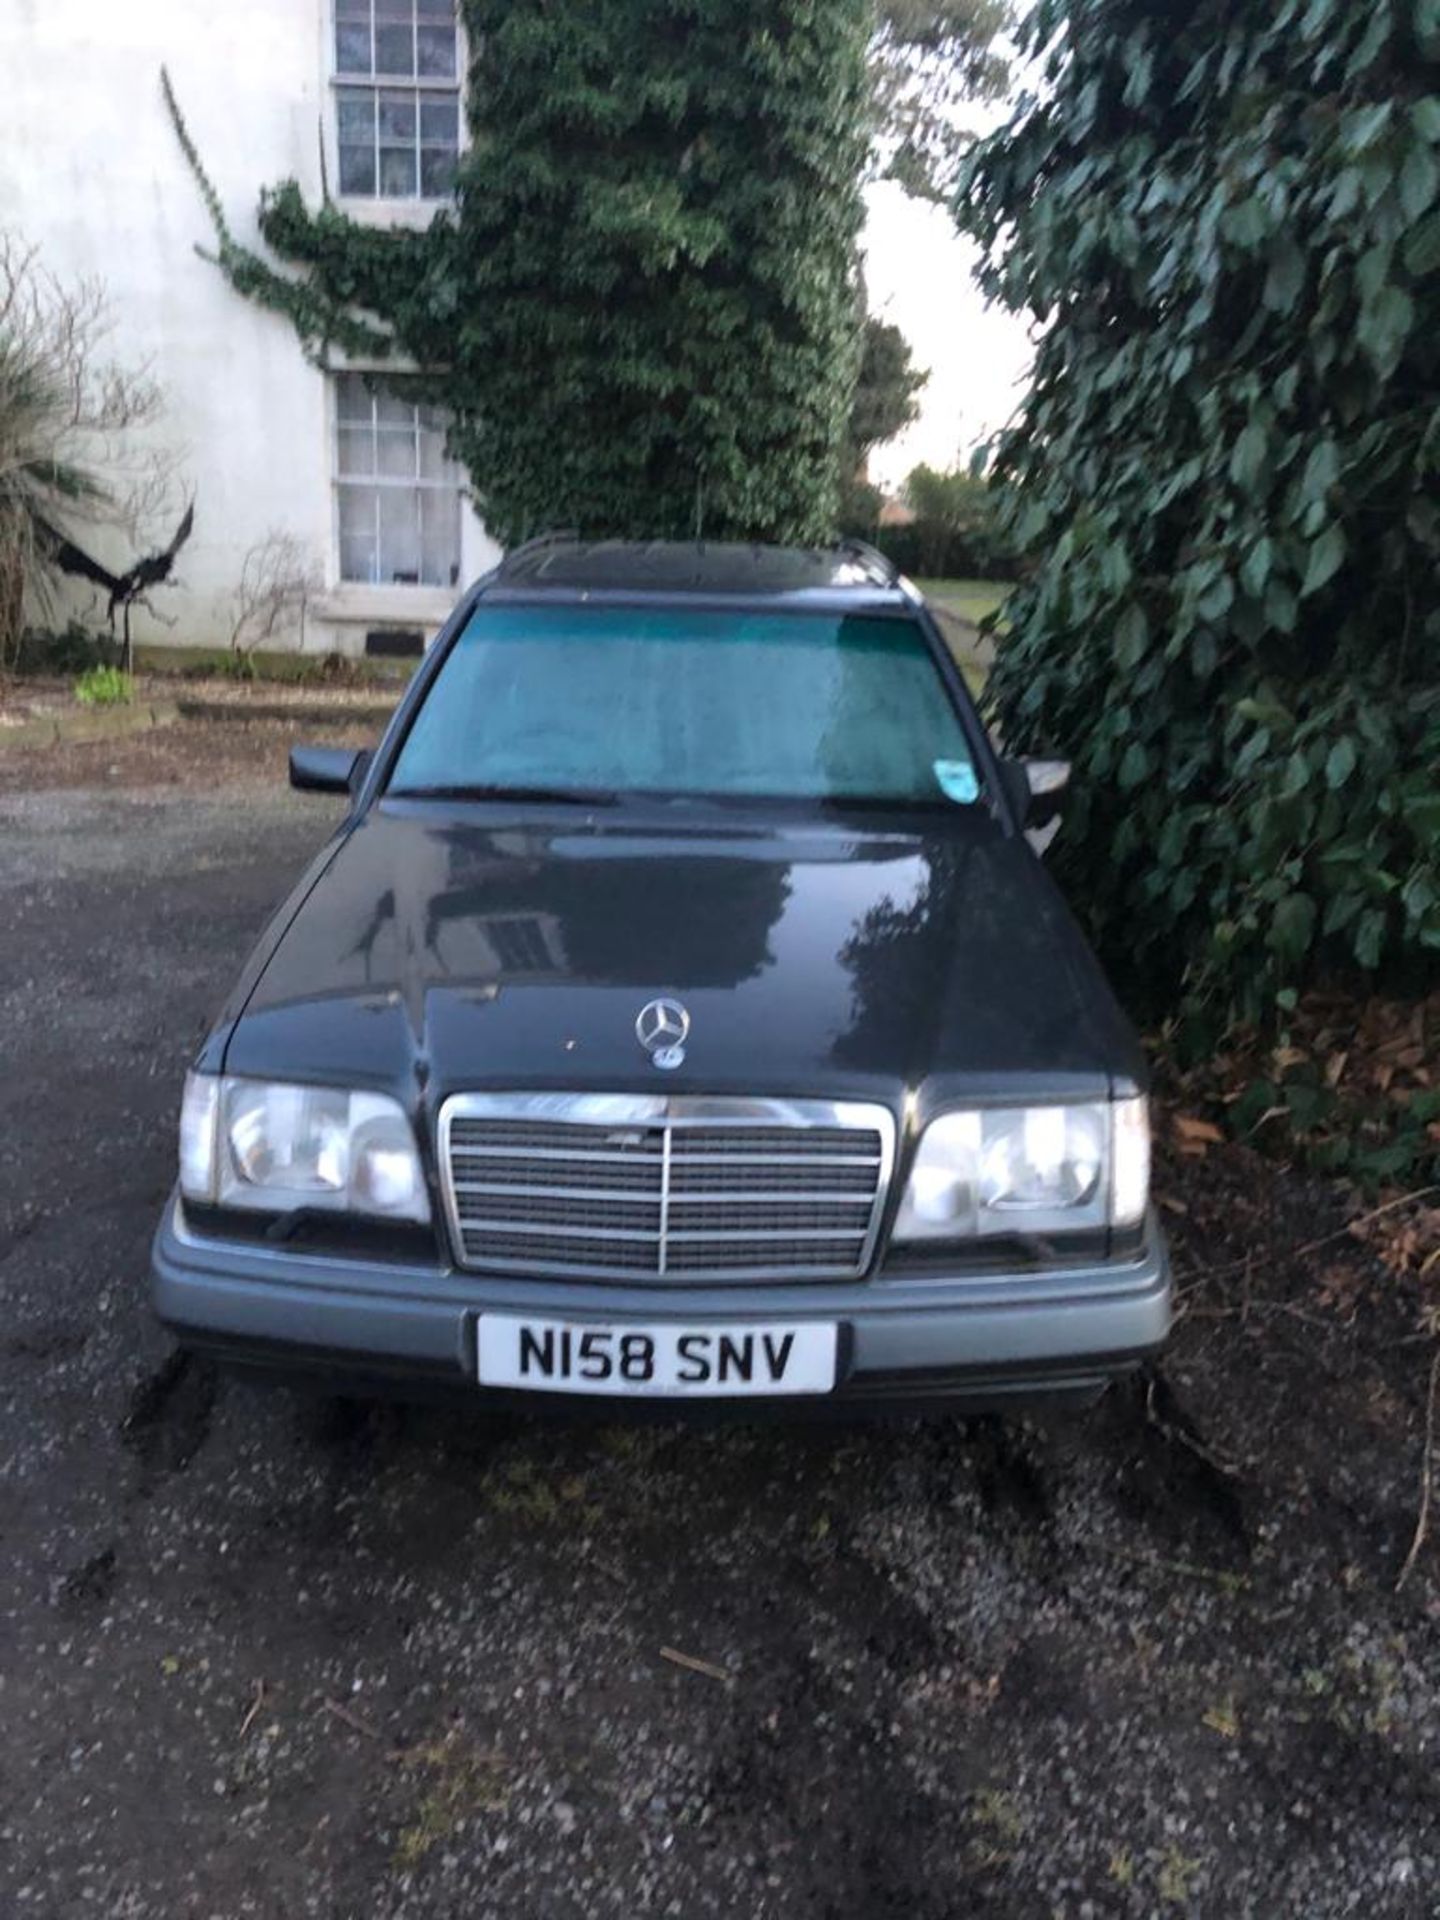 1995 MERCEDES E220 AUTO 2.2 PETROL ESTATE, 4 SPEED, 4 FORMER KEEPERS *NO VAT* - Image 2 of 21